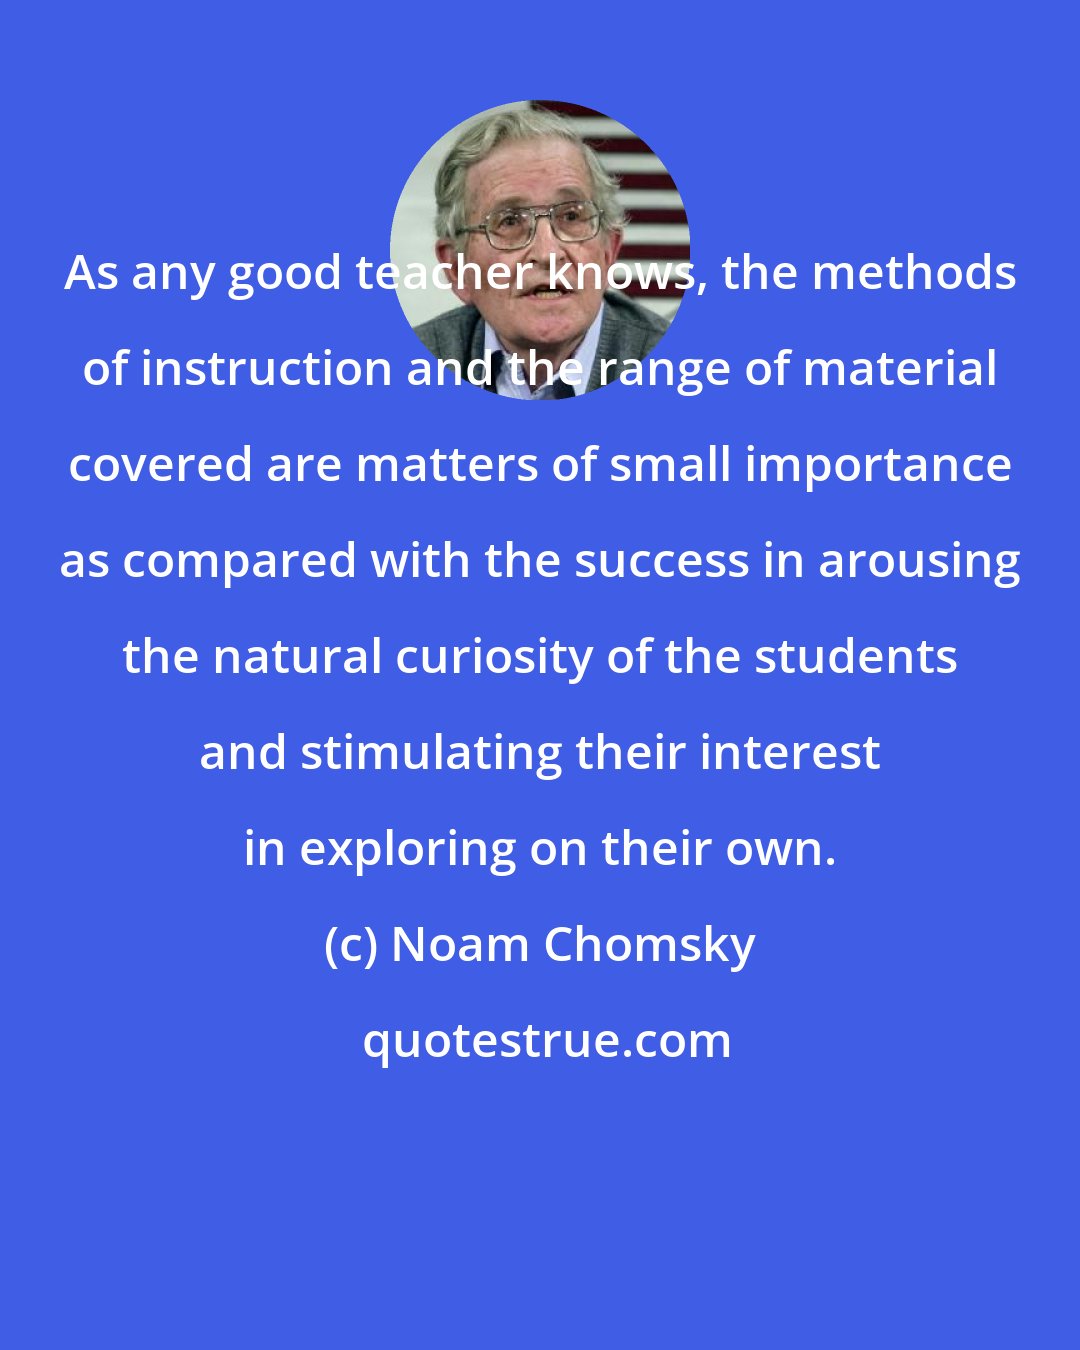 Noam Chomsky: As any good teacher knows, the methods of instruction and the range of material covered are matters of small importance as compared with the success in arousing the natural curiosity of the students and stimulating their interest in exploring on their own.